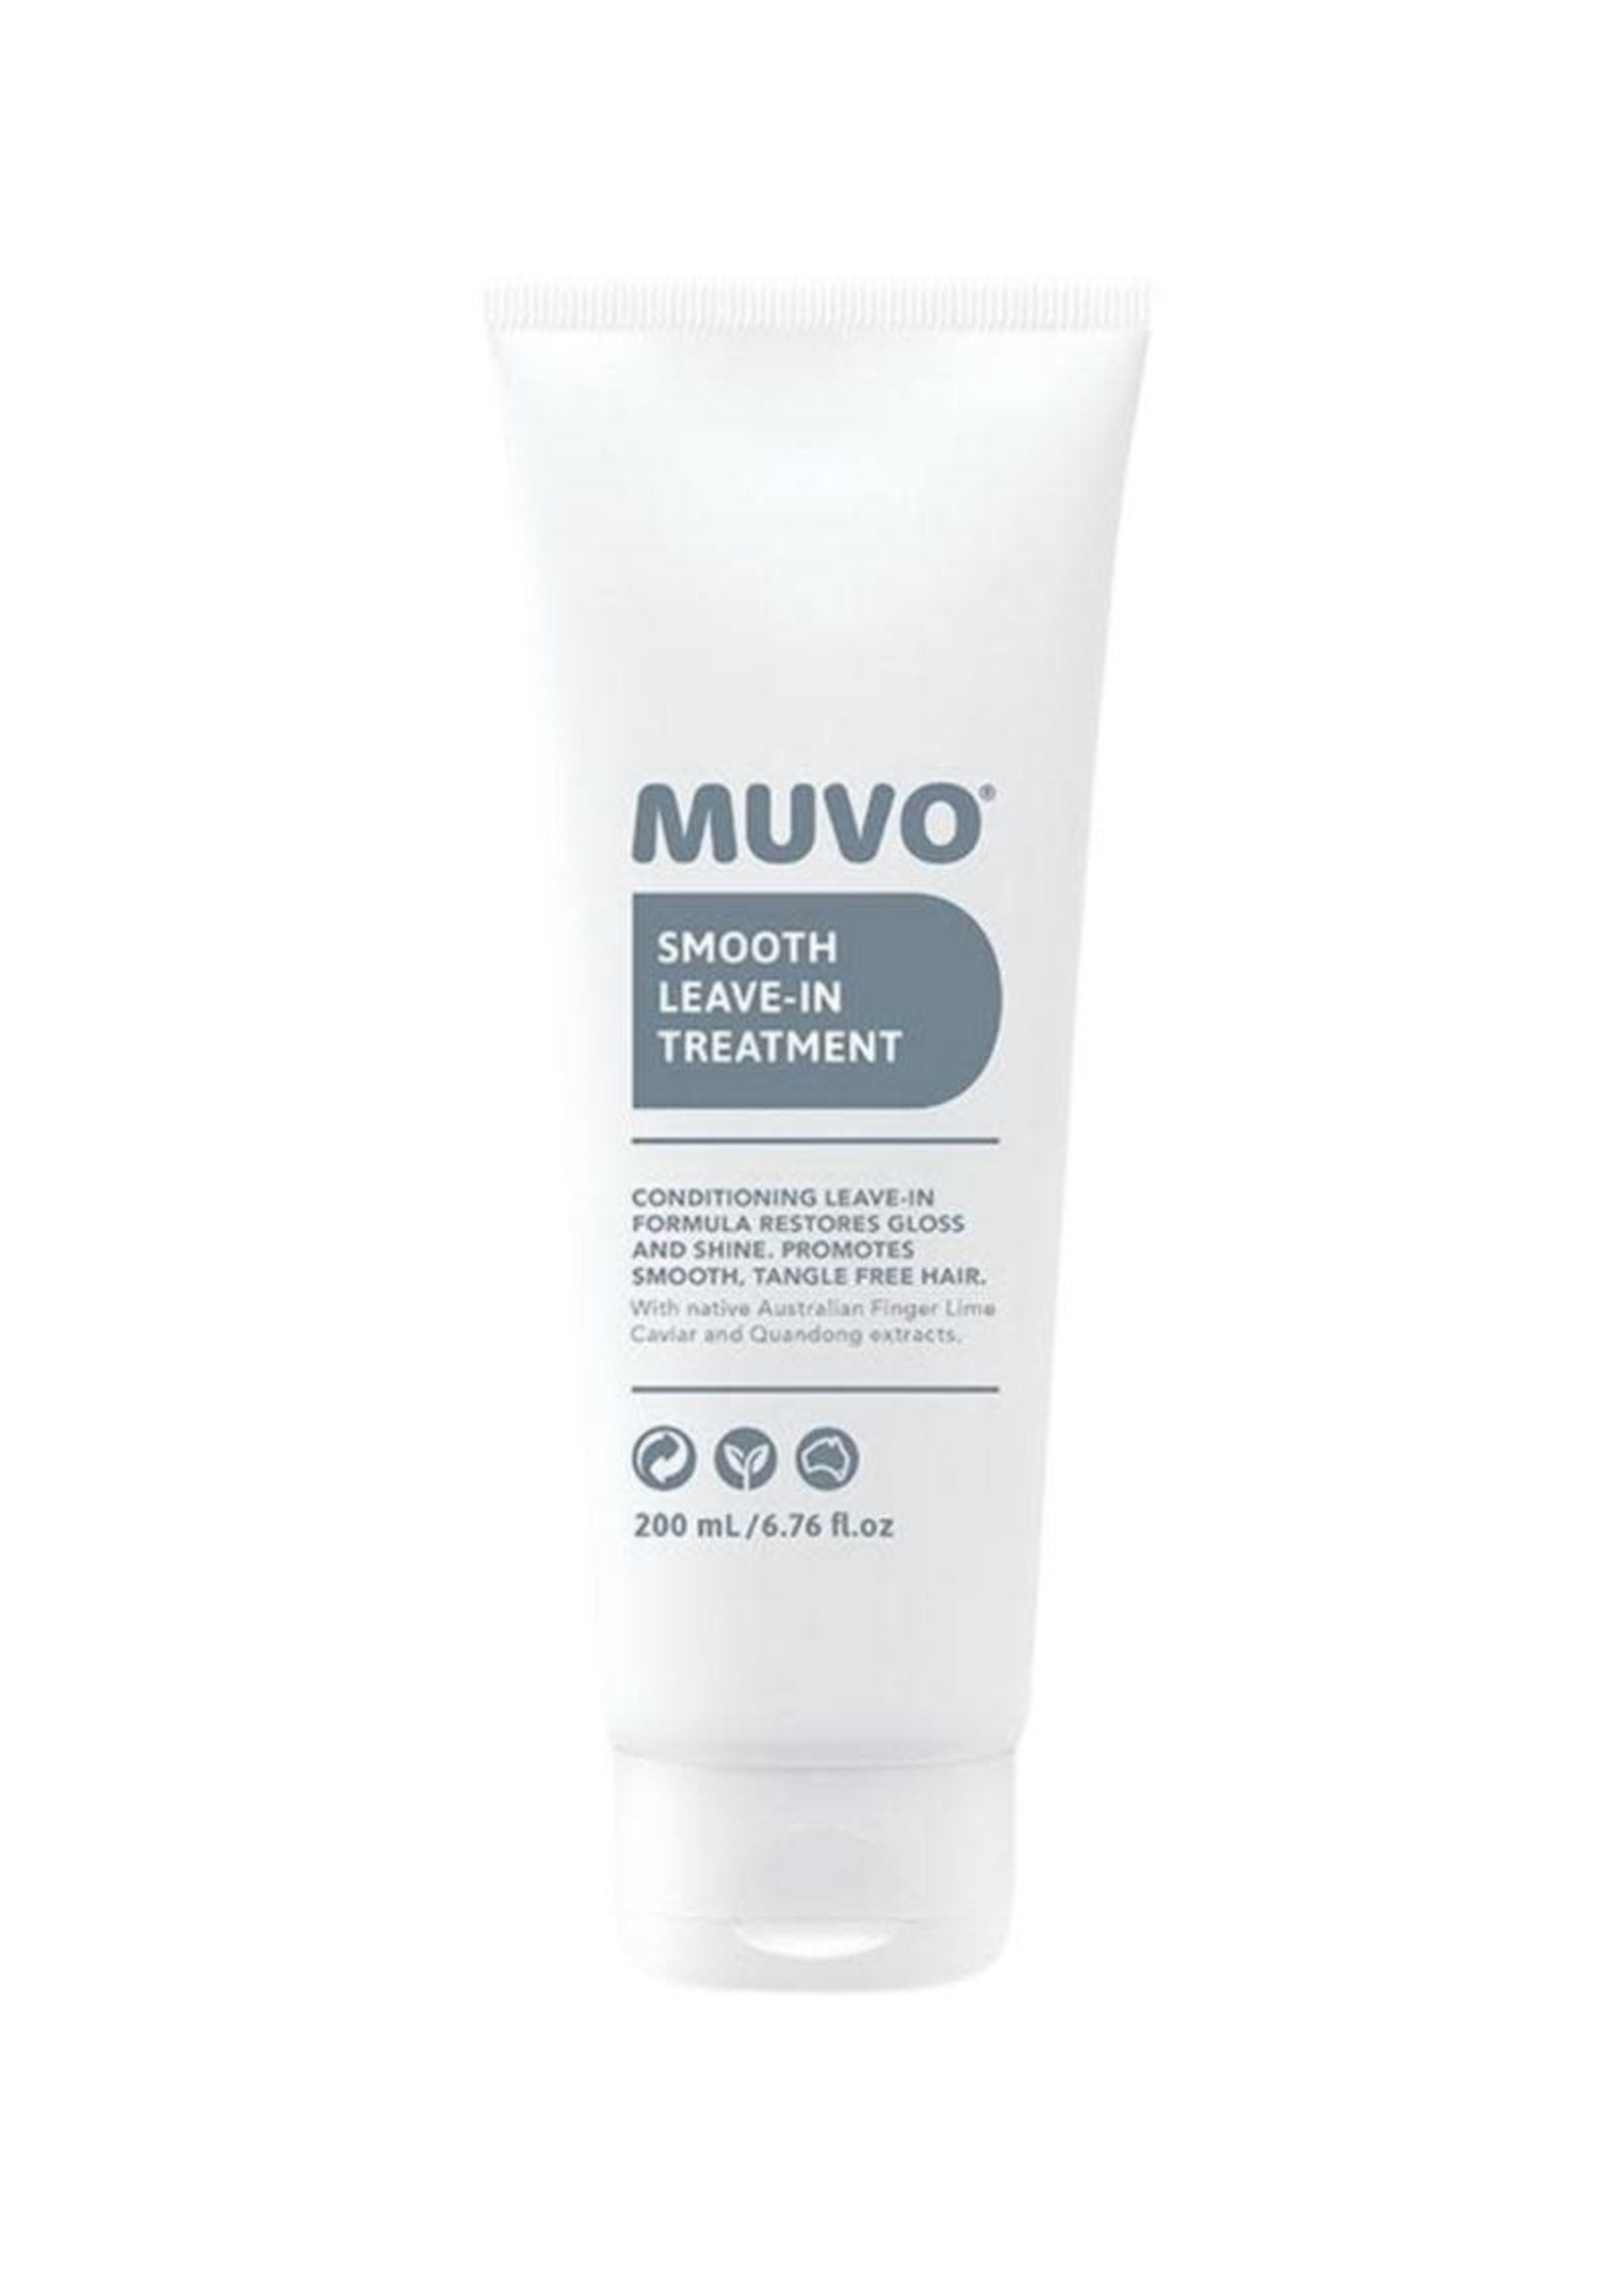 Muvo MUVO Smooth Leave-in Treatment 200ml